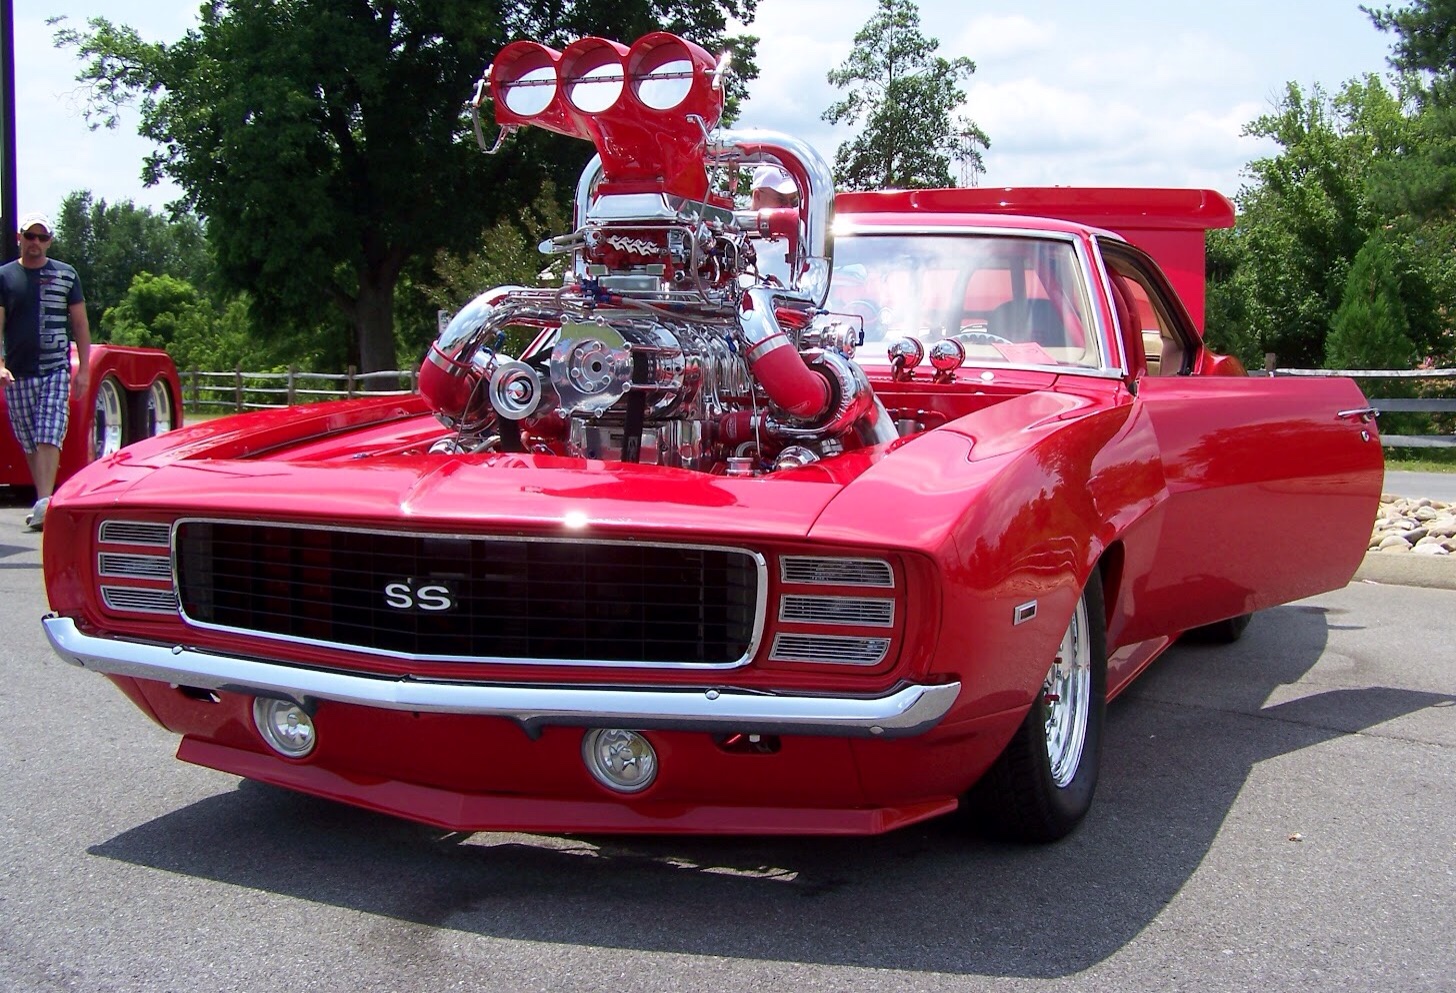 Monster 1969 Camaro SS with Turbos, Nitrous, and a Blower!